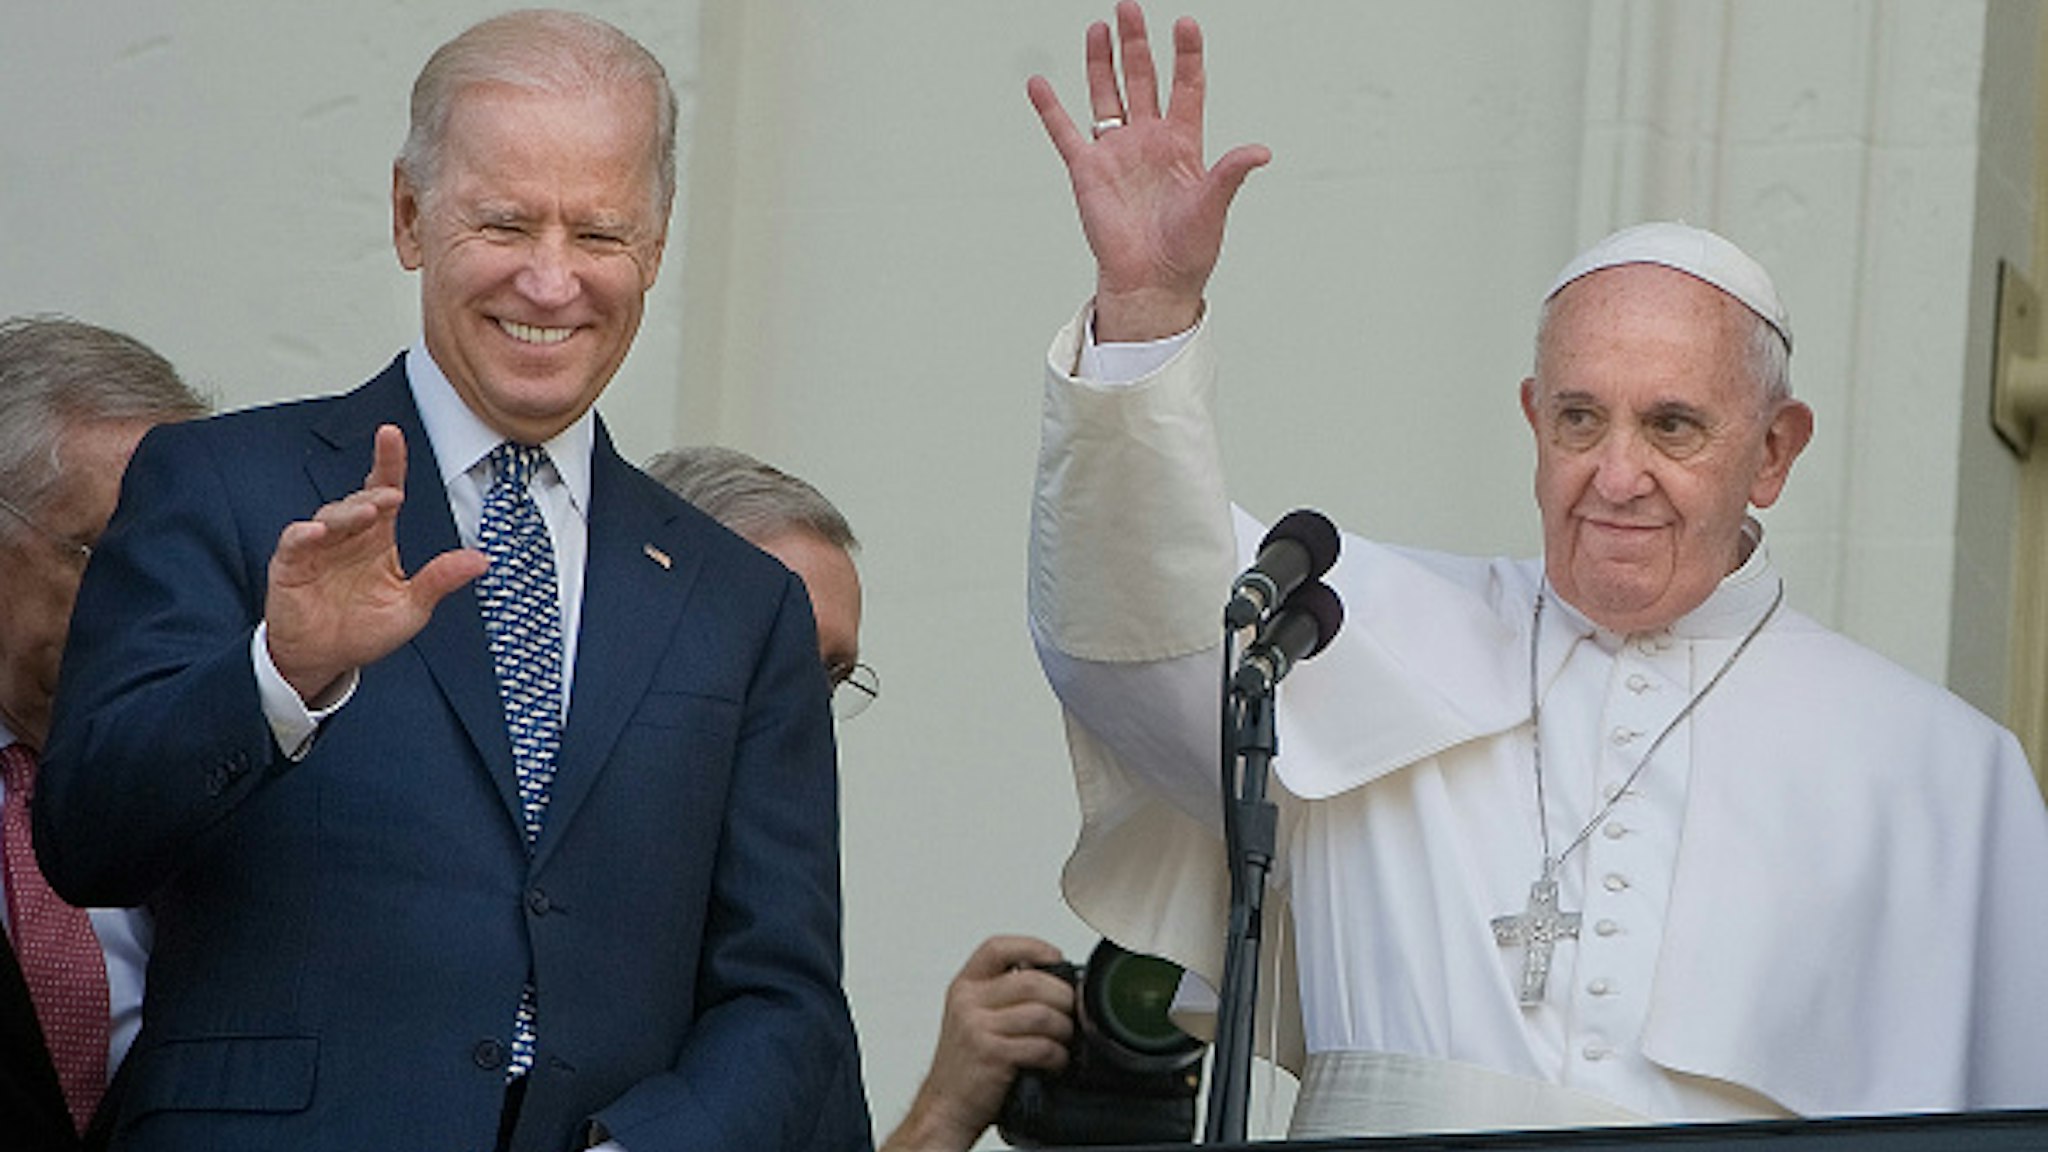 WASHINGTON D.C., CA - SEPTEMBER 24: Pope Francis is joined by Vice President Joseph Biden after addressing Congress on his first U.S. visit.